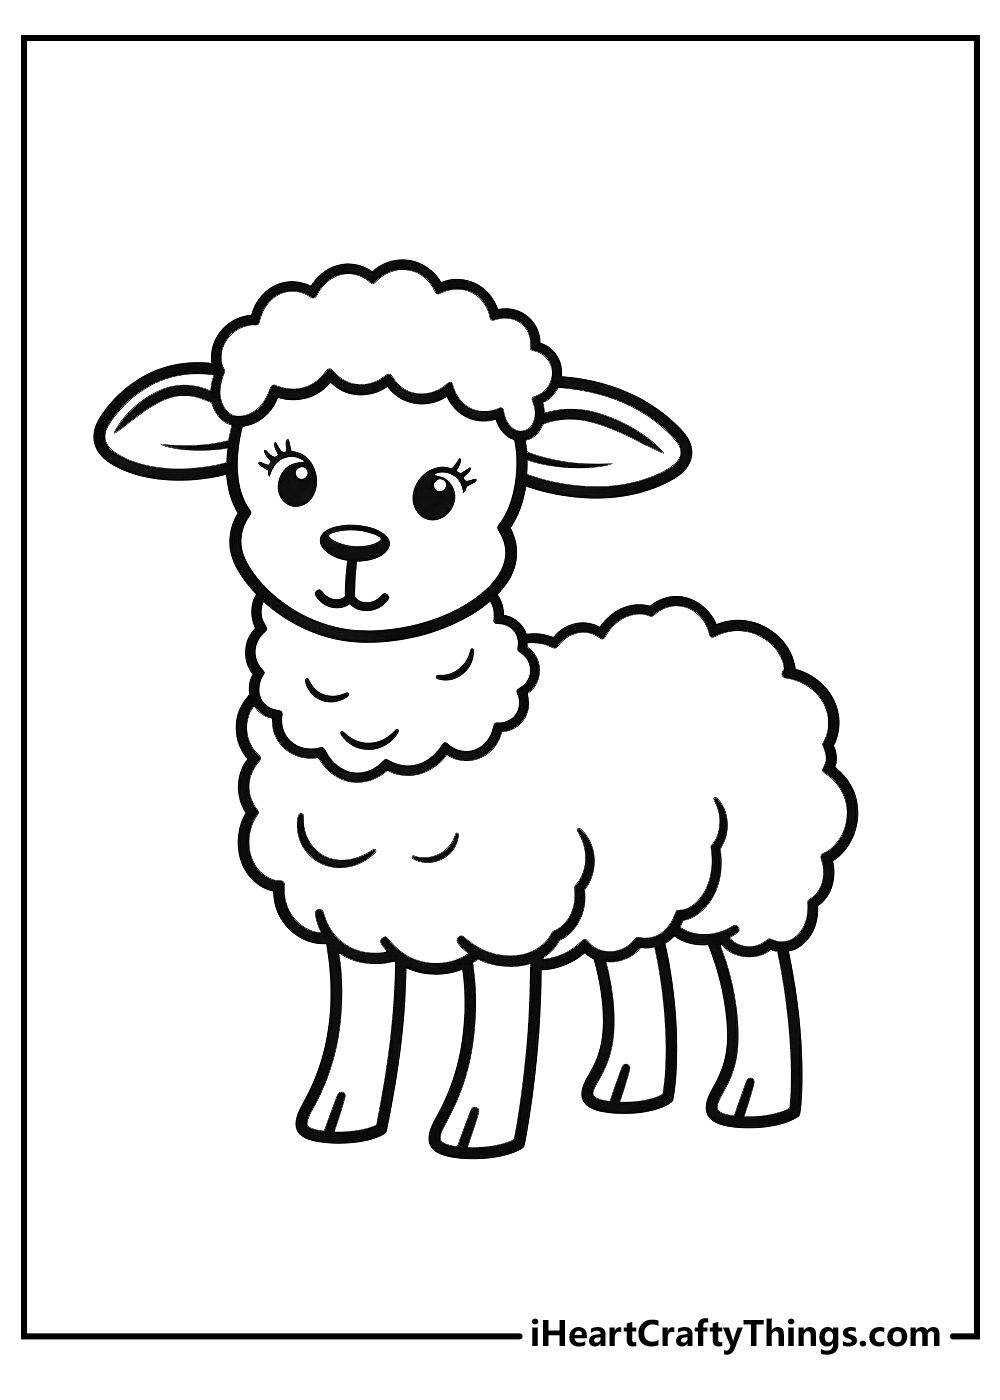 Sheep coloring pages free printables